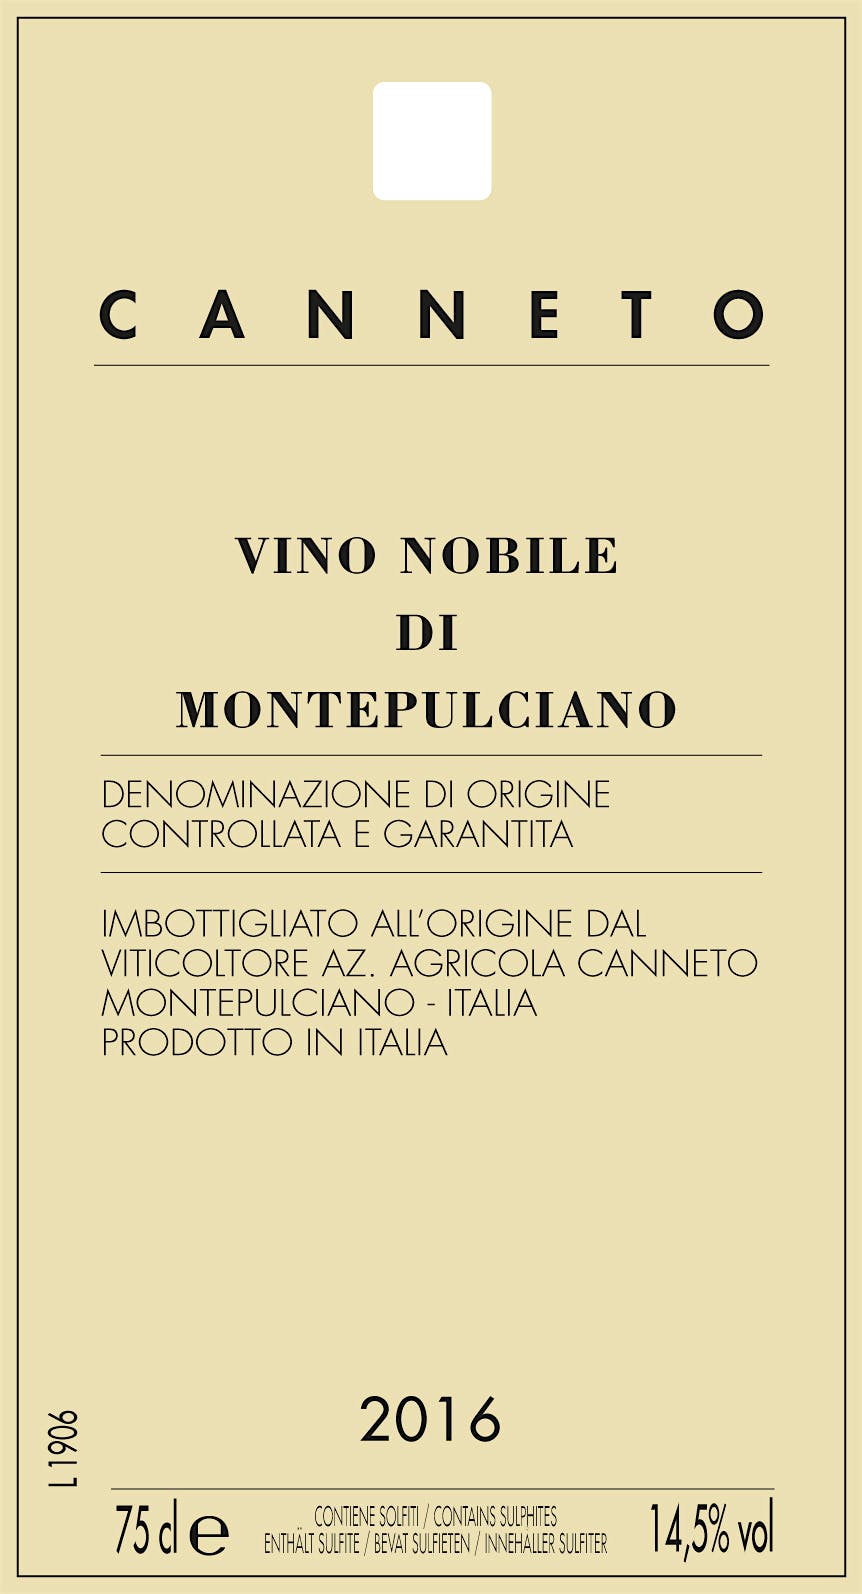 Label for Canneto